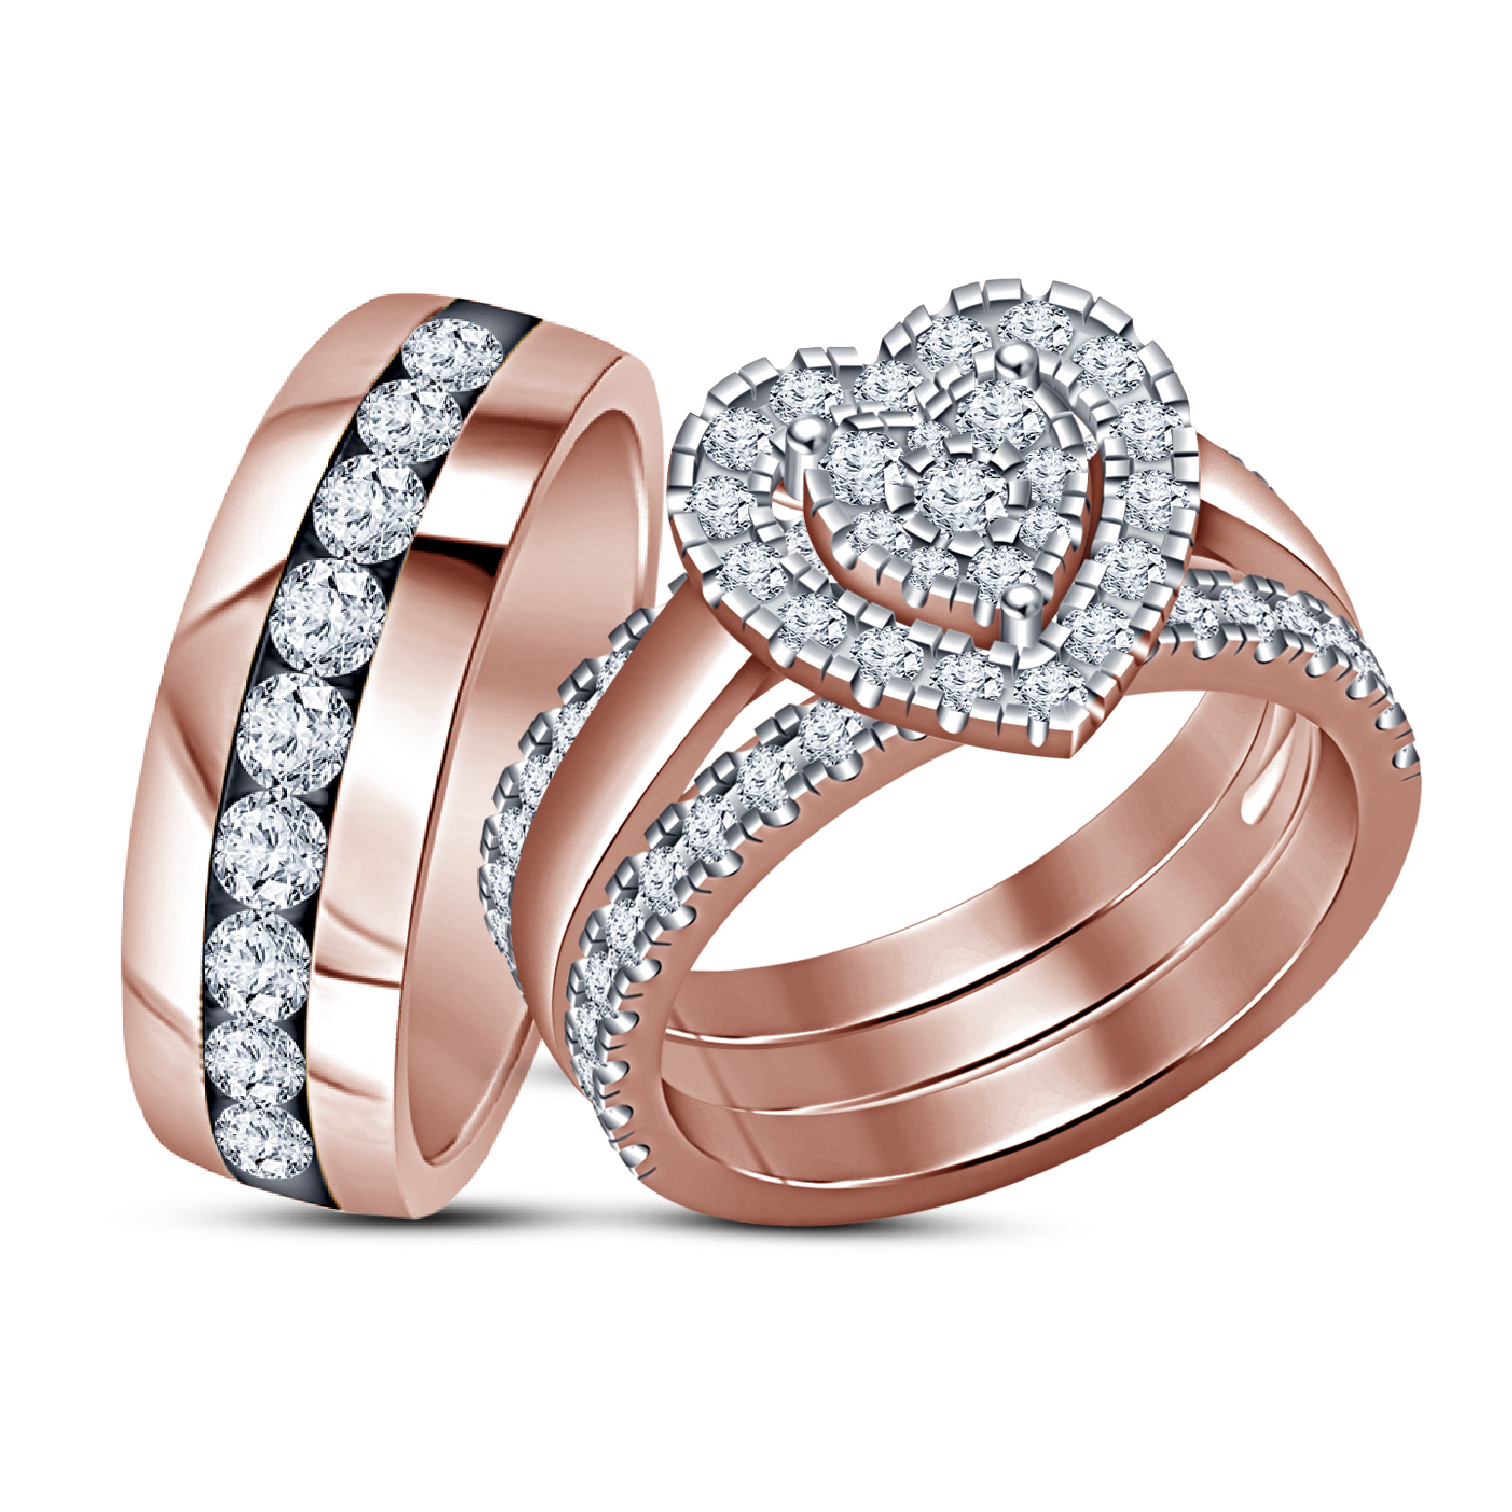  His  And Hers  Wedding Bands and Her Ring  Rose Gold  Finish 